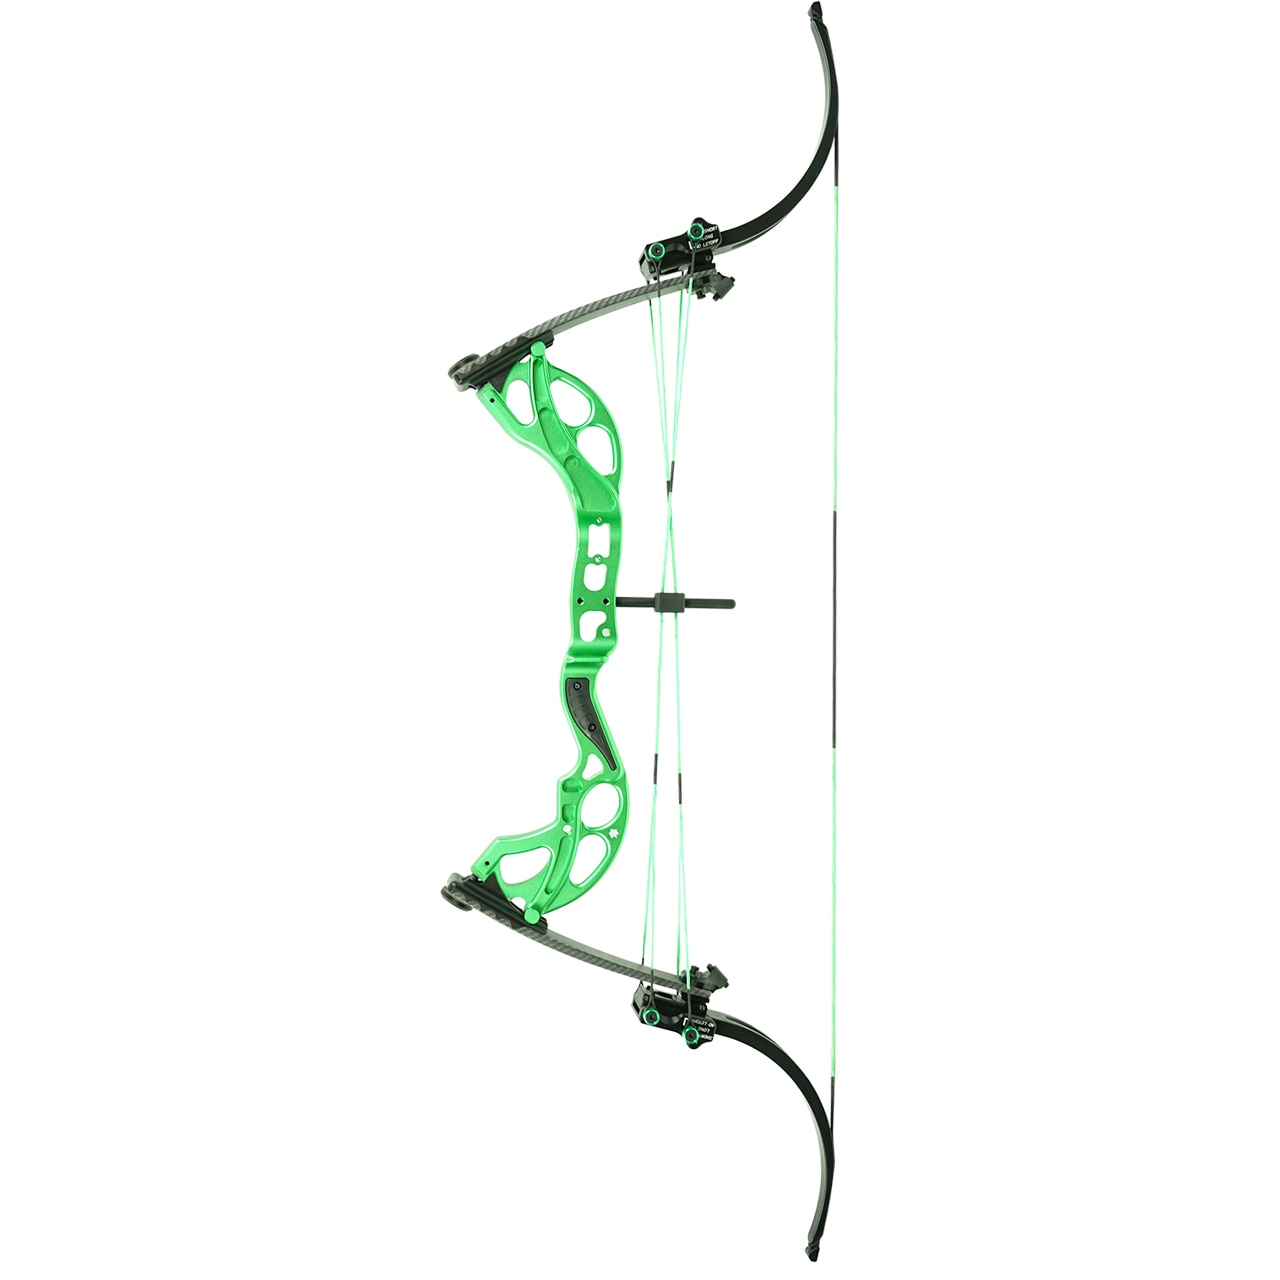 Top Quality Bowfishing Equipment for Sale - Bowtreader